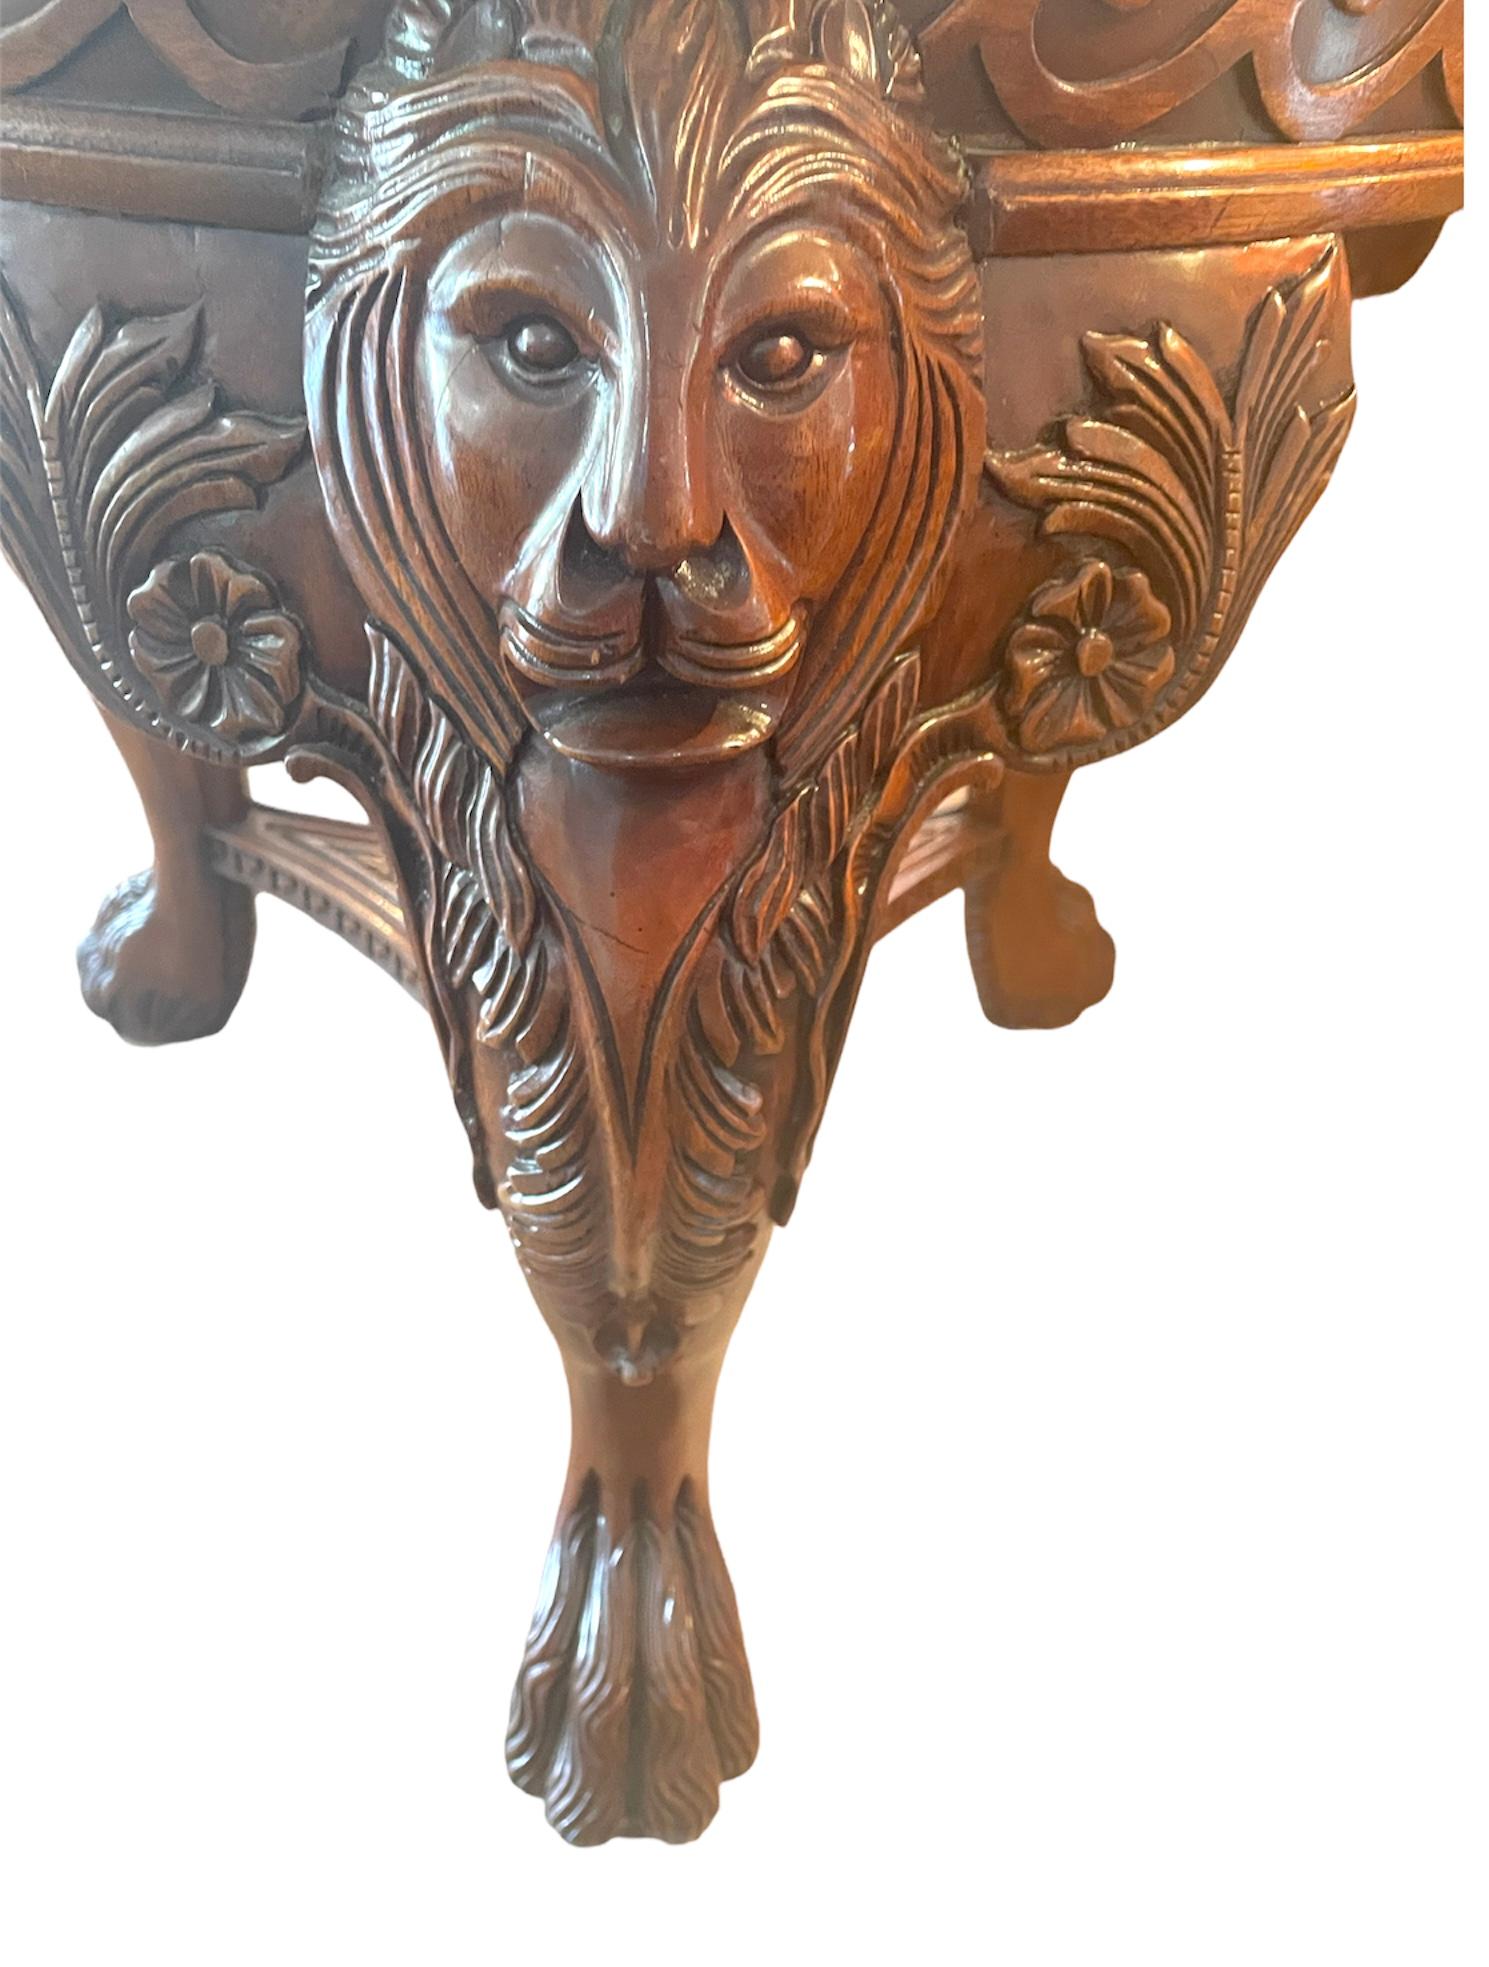 Chinese Chippendale style mahogany lions head claw feet pedestal dining table. Item features solid carved wood pedestal base with lions heads, claw feet, Greek key details, stretcher base, and bevelled glass round top is 43 inches- it was used as a